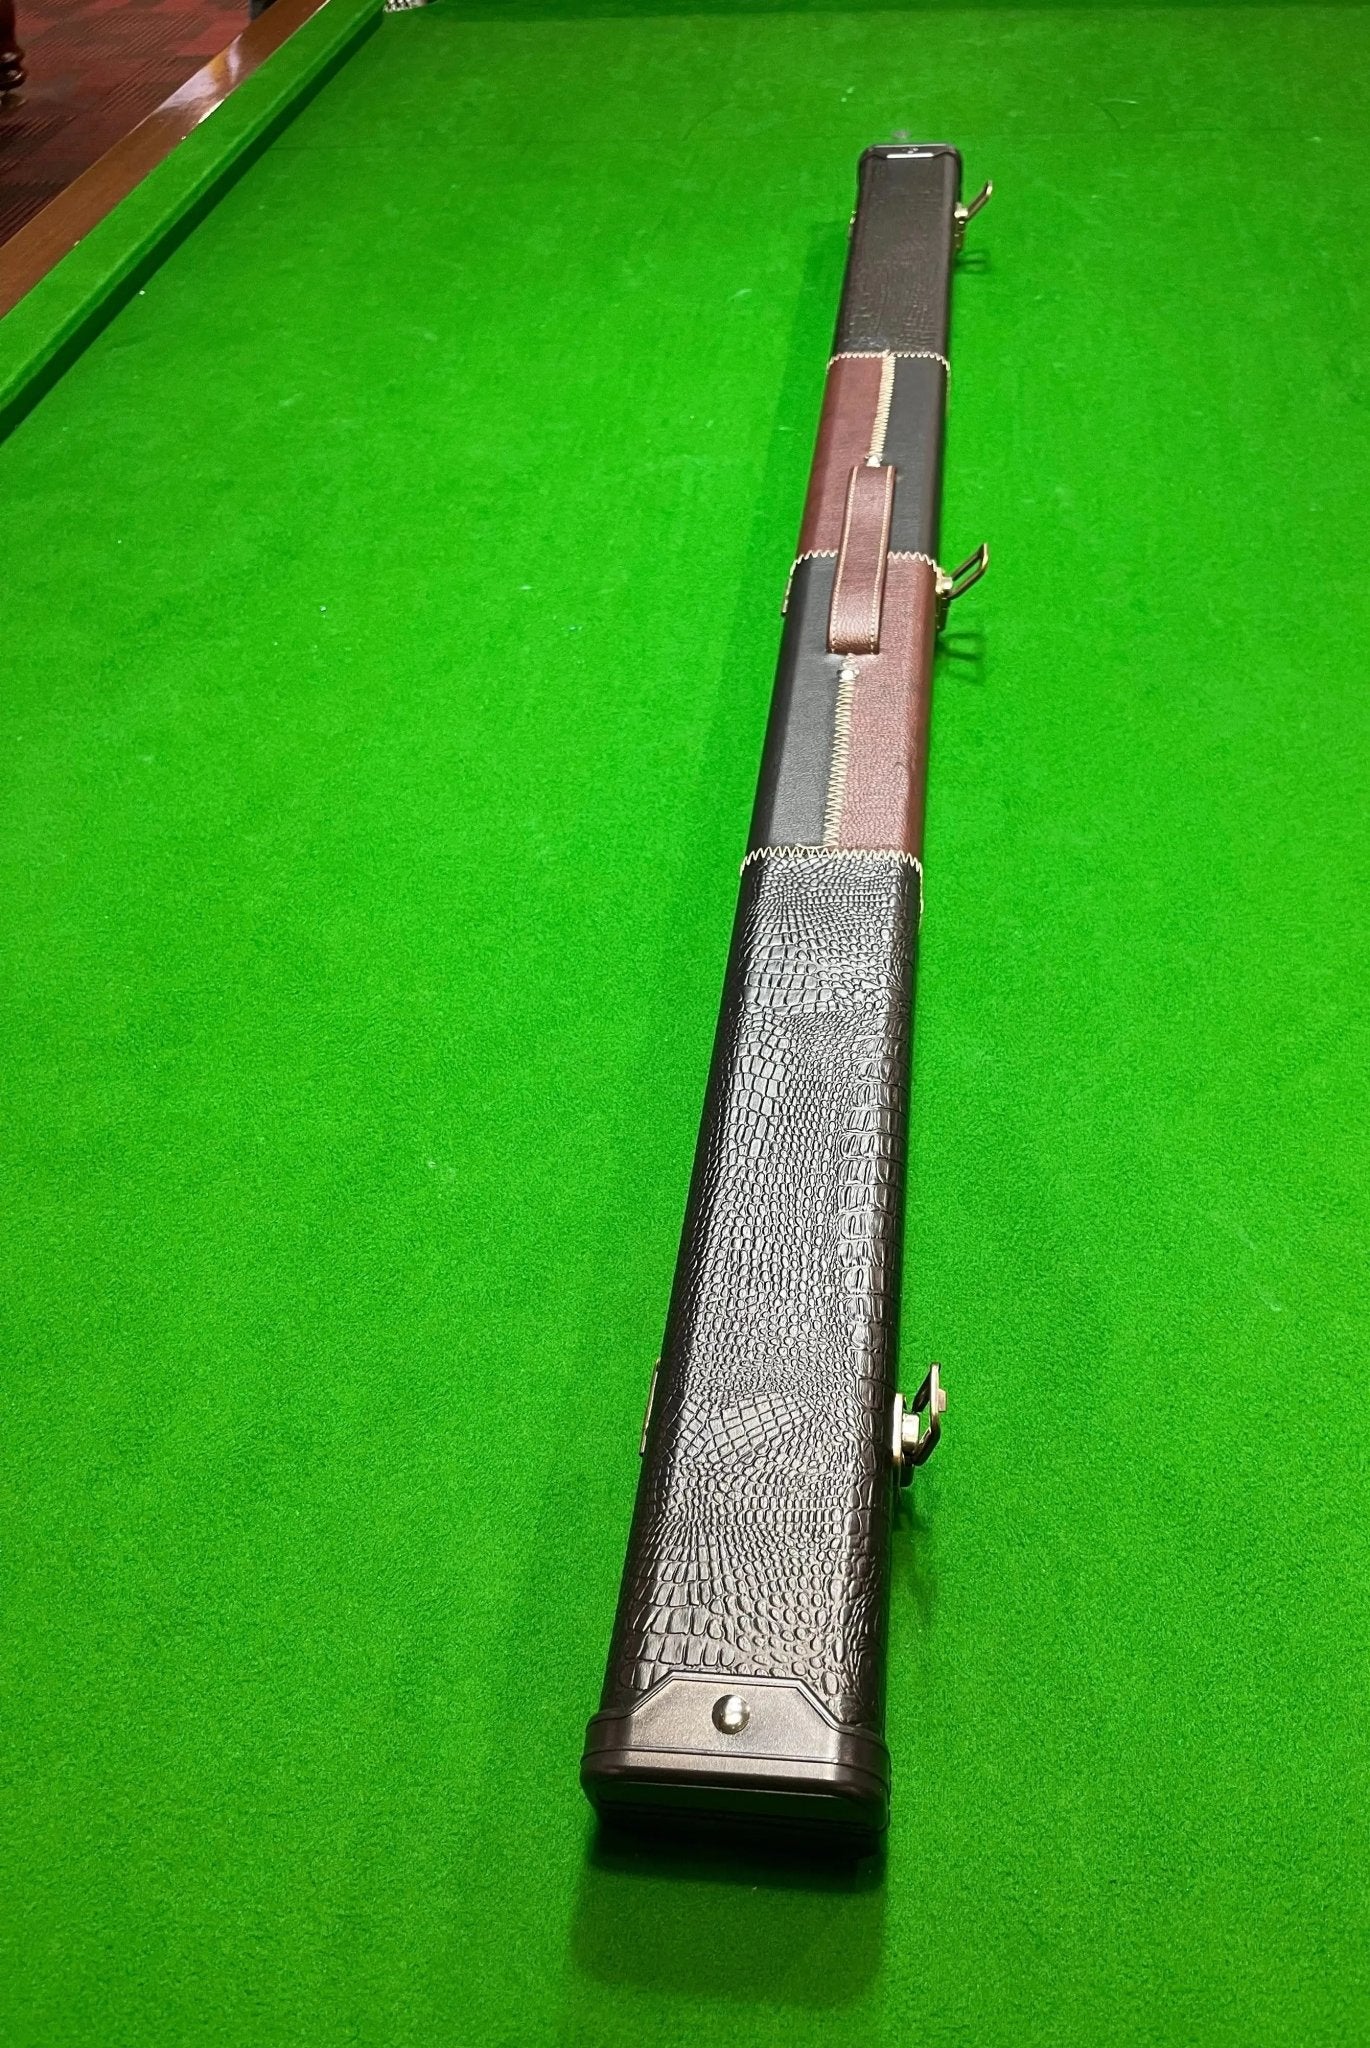 Deluxe Leather Art 3/4 Pool, Snooker, & Billiard Cue Case - Q-Masters